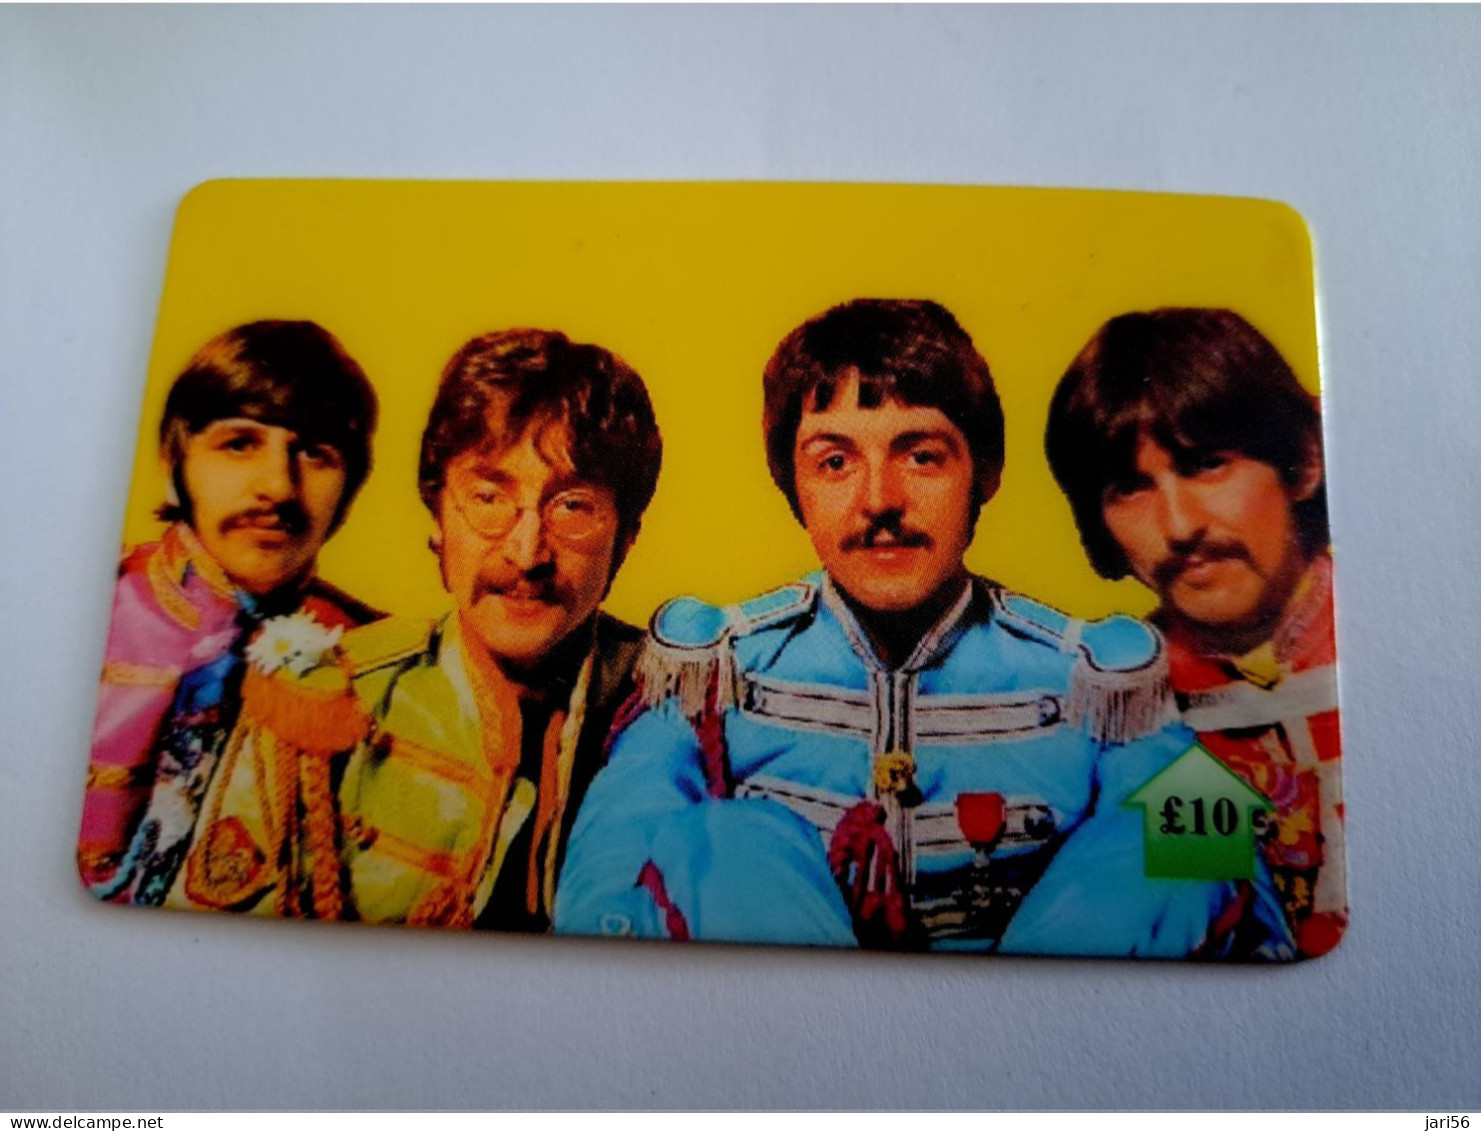 GREAT BRITAIN / 10 POUND /MAGSTRIPE  / BEATLES  PHONECARD/ LIMITED EDITION/  ONLY 500 EX     **15690** - Collezioni